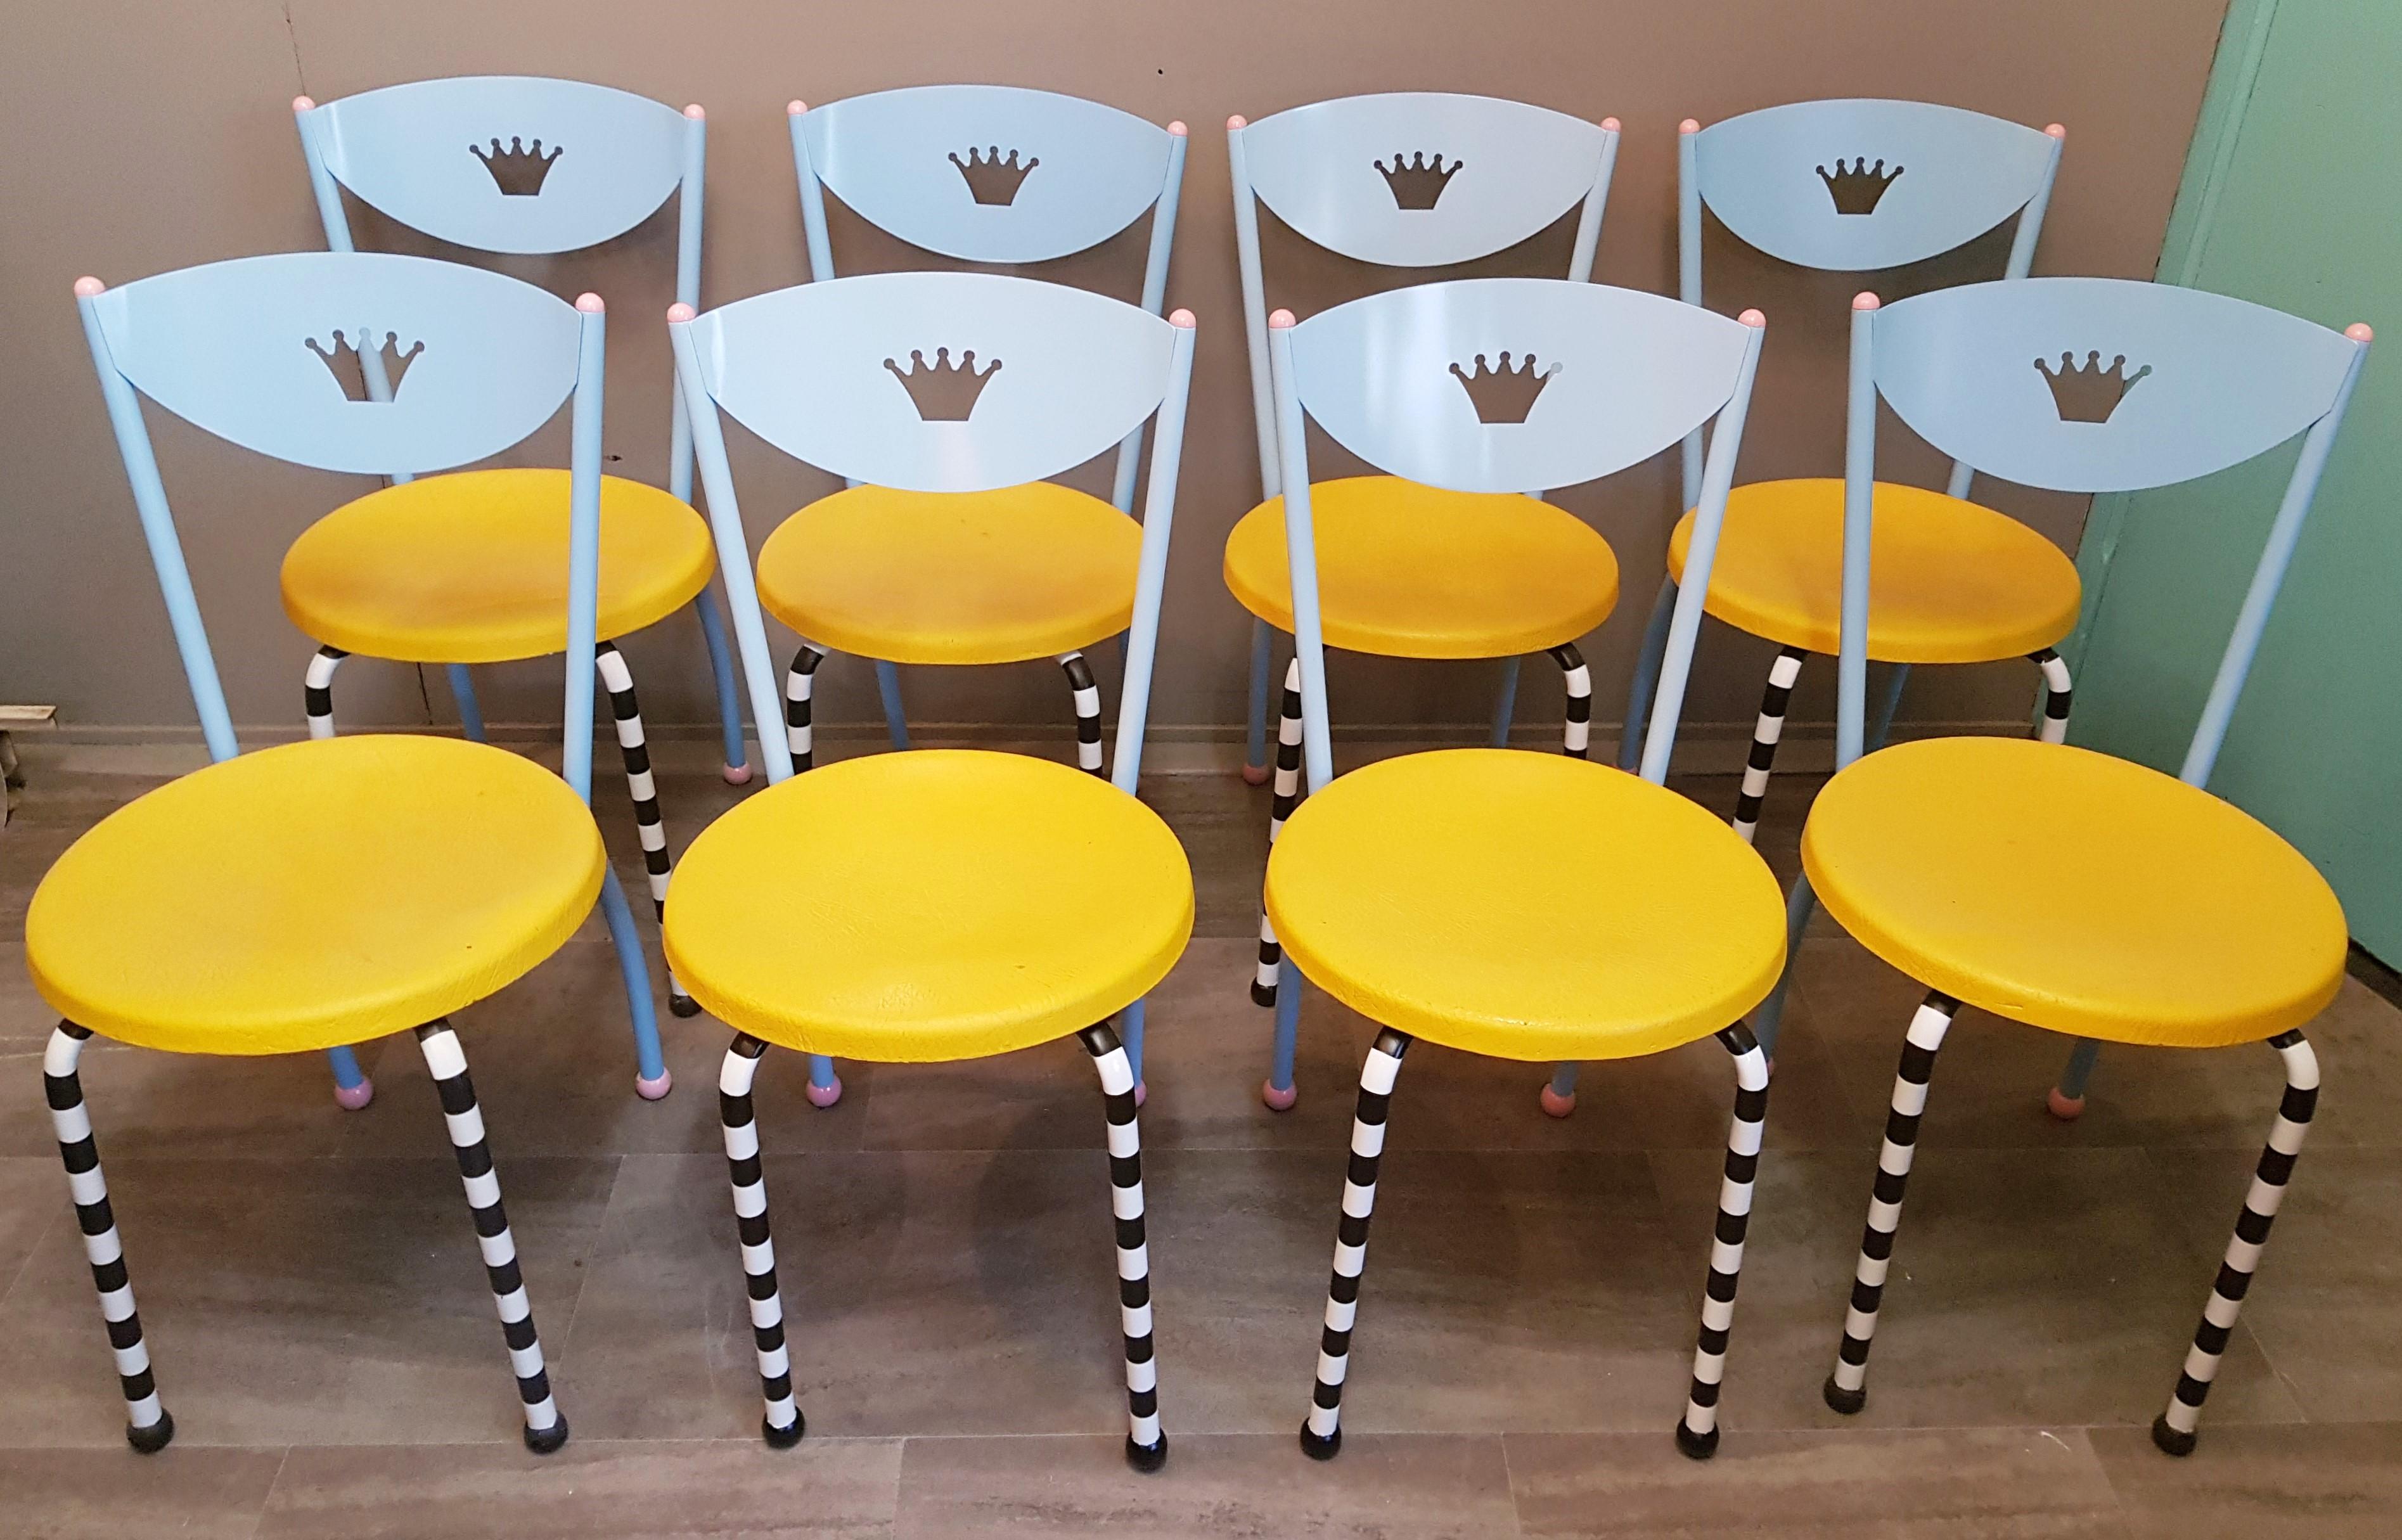 8 Memphis Postmodern dining chairs manner of Michele De Lucci, Italy, 1980s.

Fiberglass seat. Metal frame. Solid and stabile.

Perfect condition, unique design.